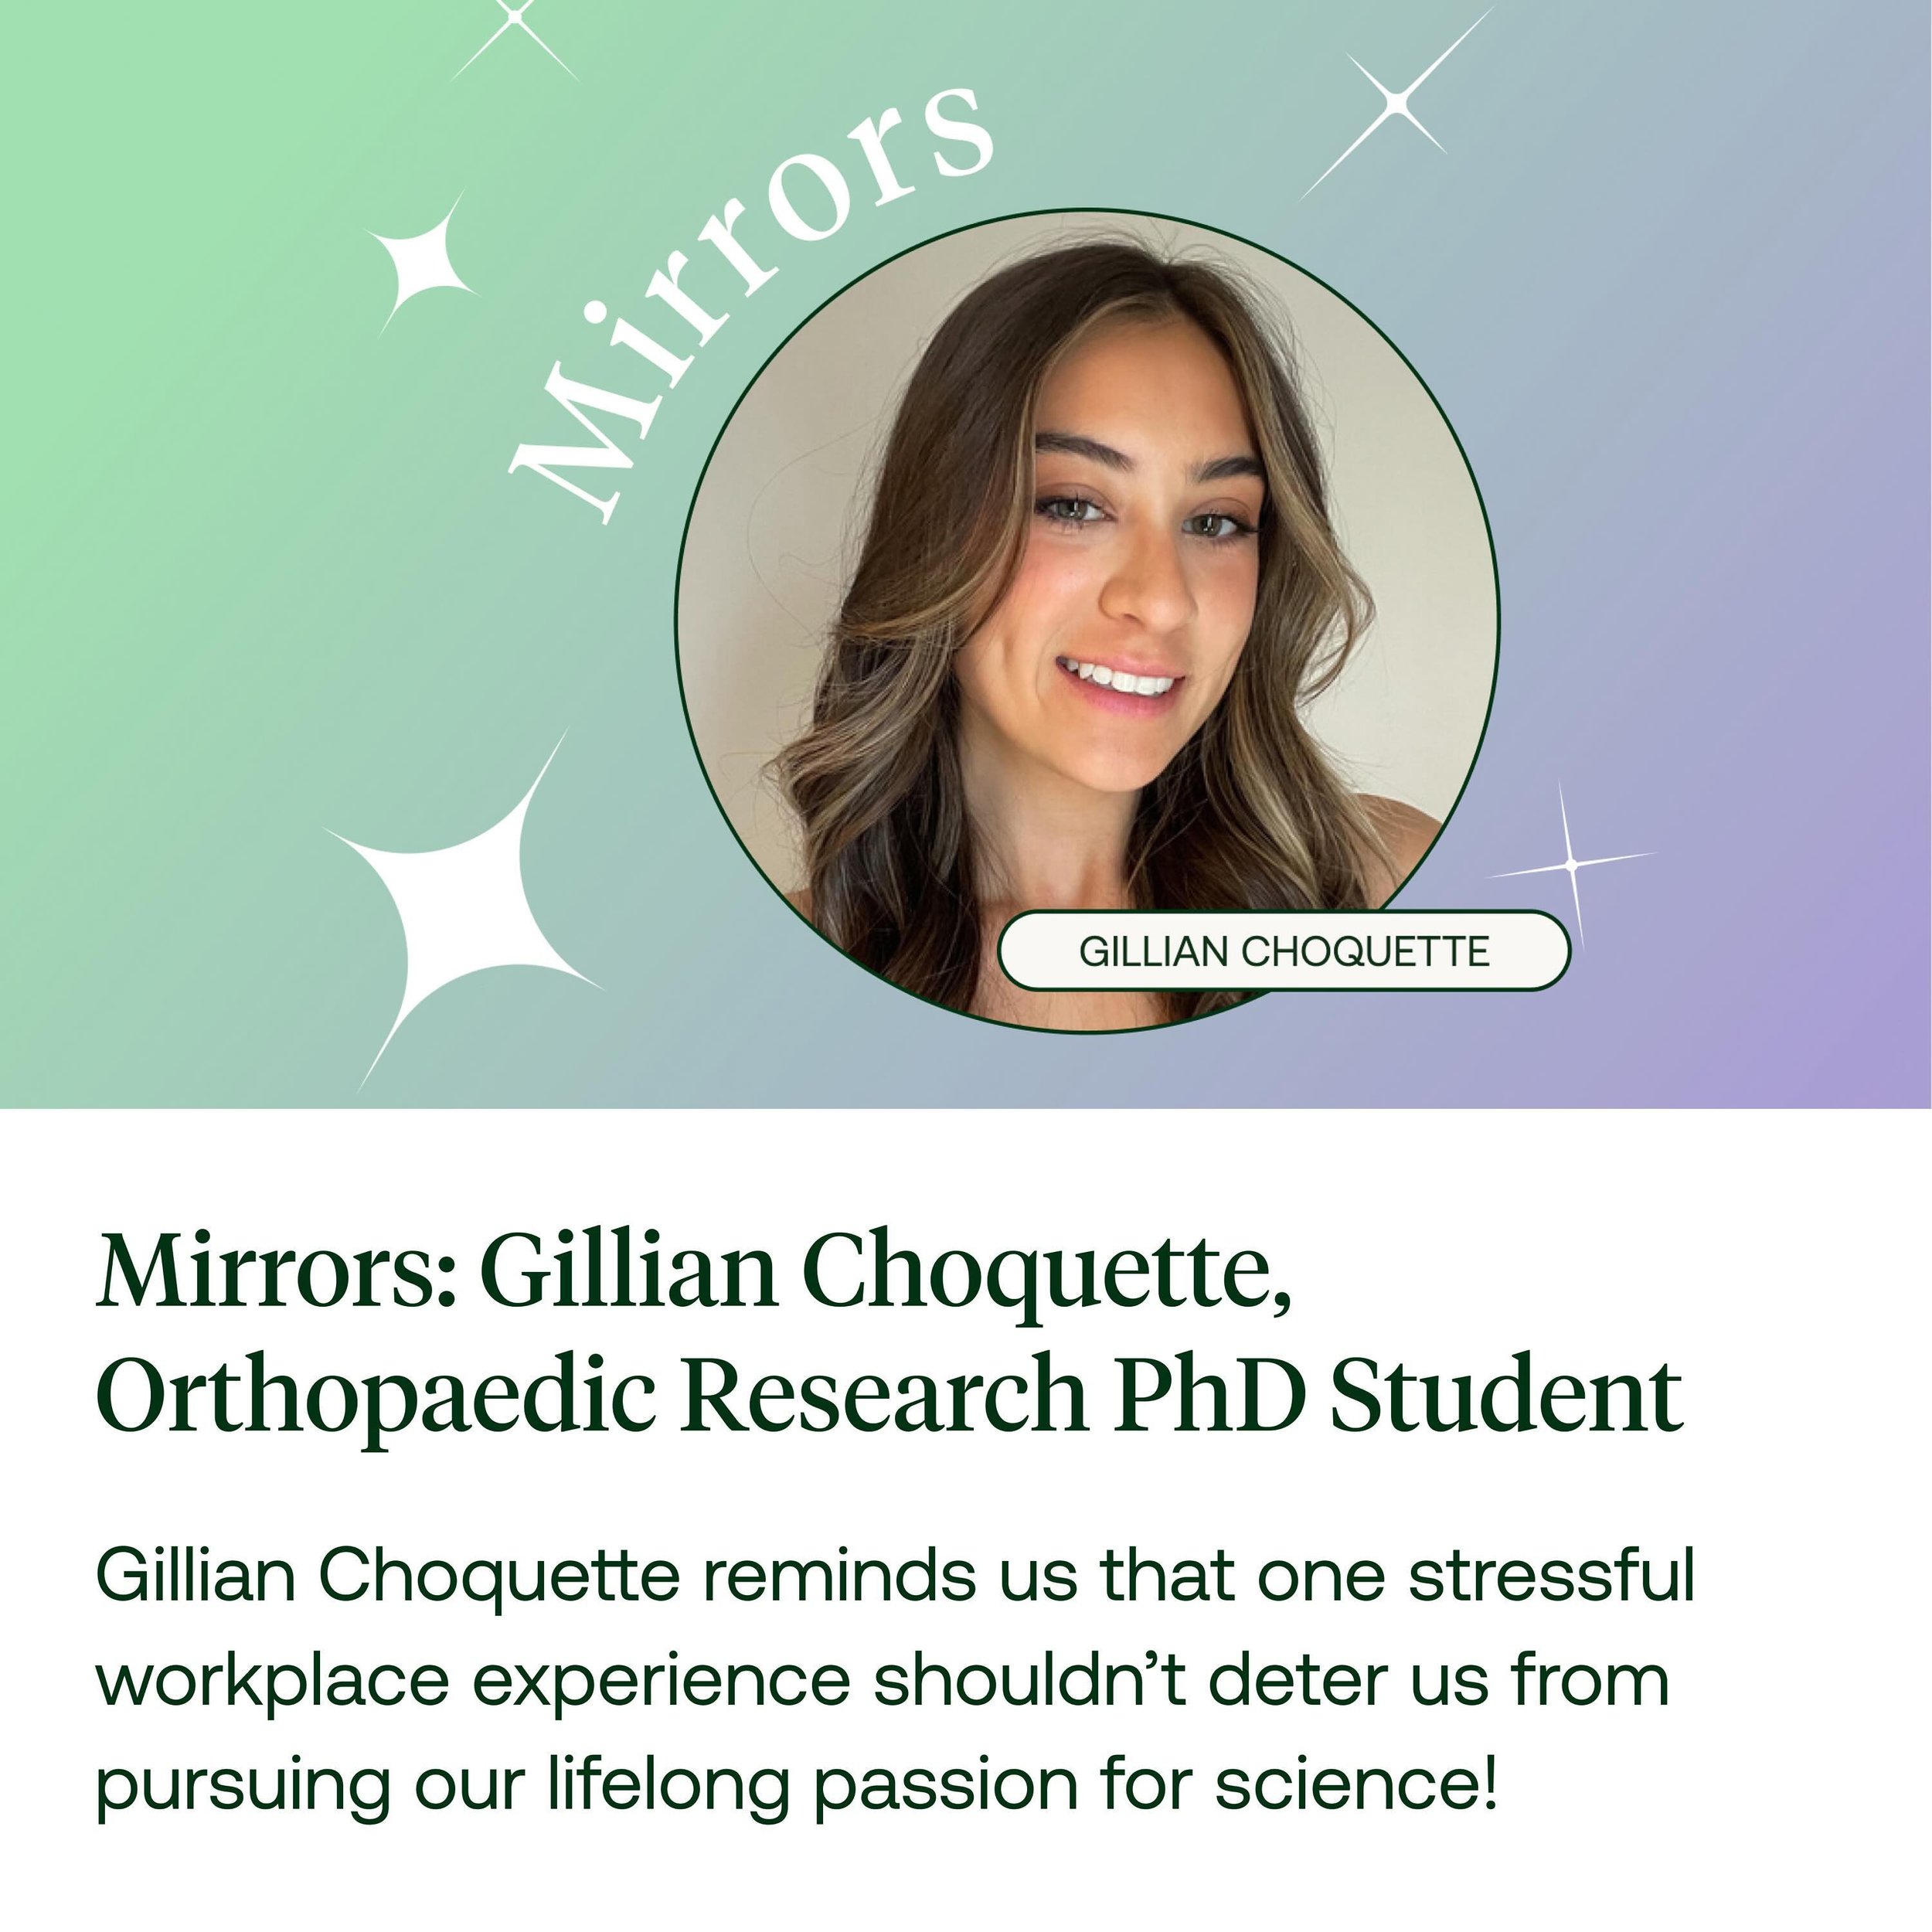 ✨ We&rsquo;re back with more AdaMarie Mirrors!

🦴🔬Orthopaedic Research PhD Student @gillian_sci reminds us that one stressful workplace experience shouldn&rsquo;t deter us from pursuing our lifelong passion for science!

💚 Click the link in bio to